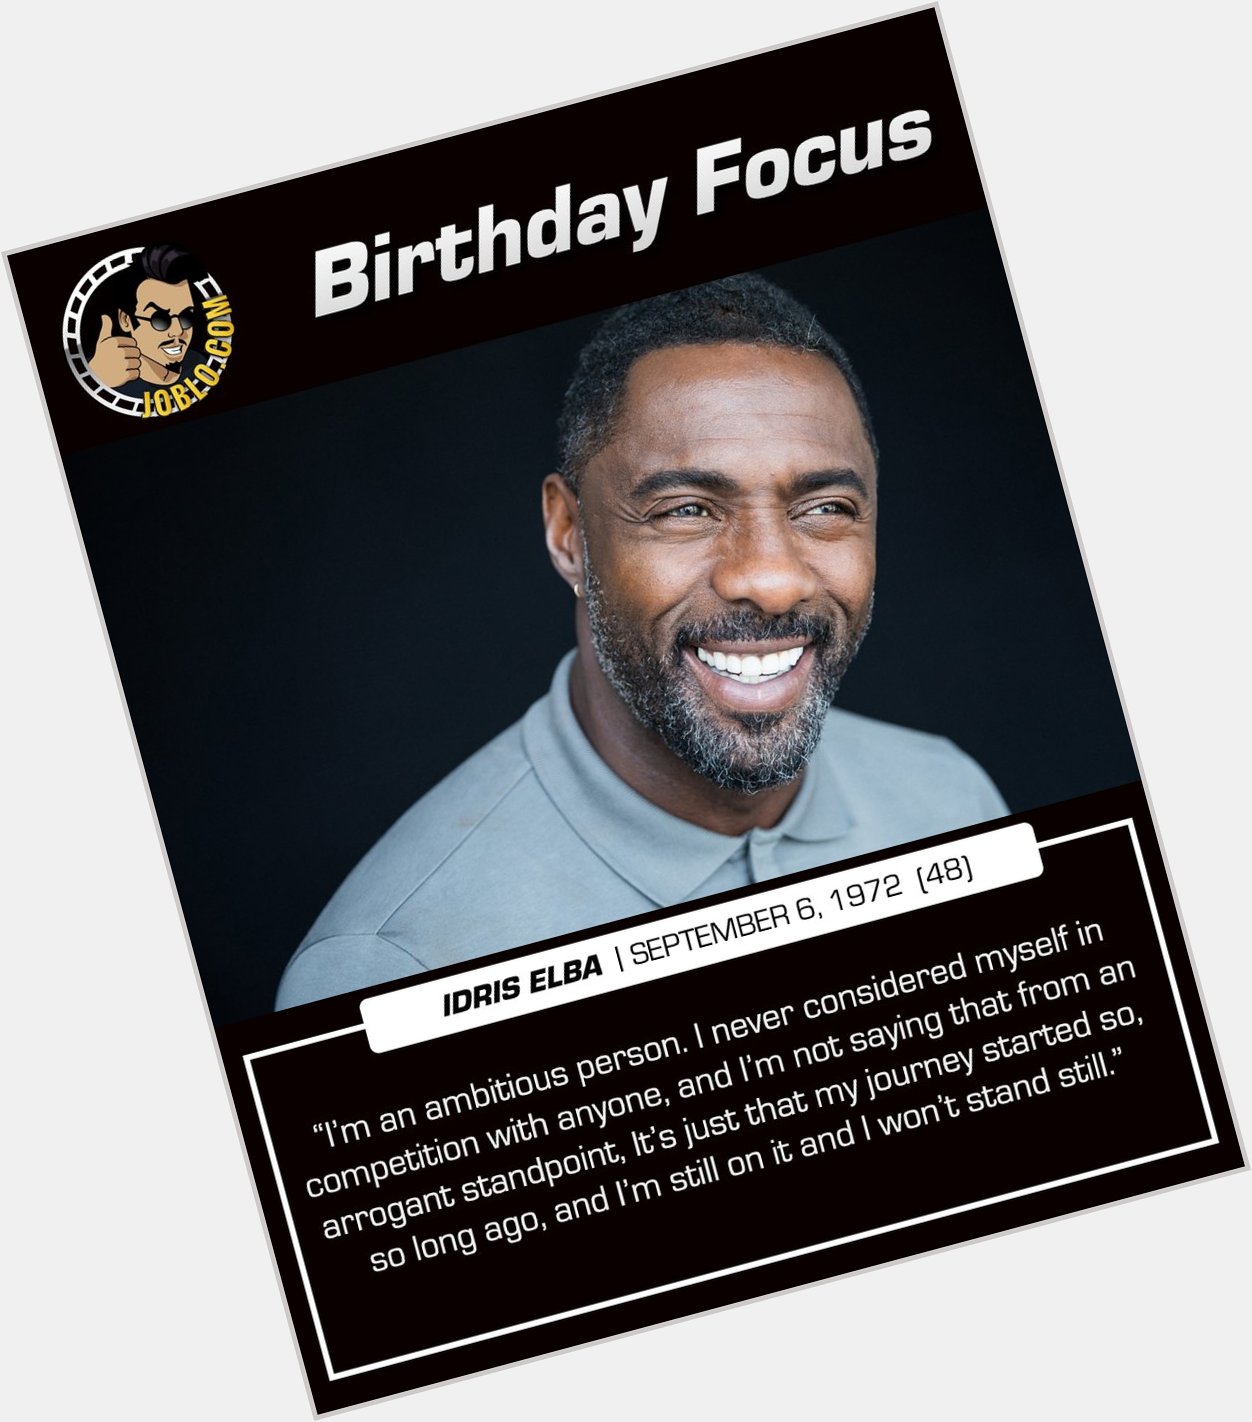 Happy 48th birthday to Idris Elba!

What\s your favorite role of his? 